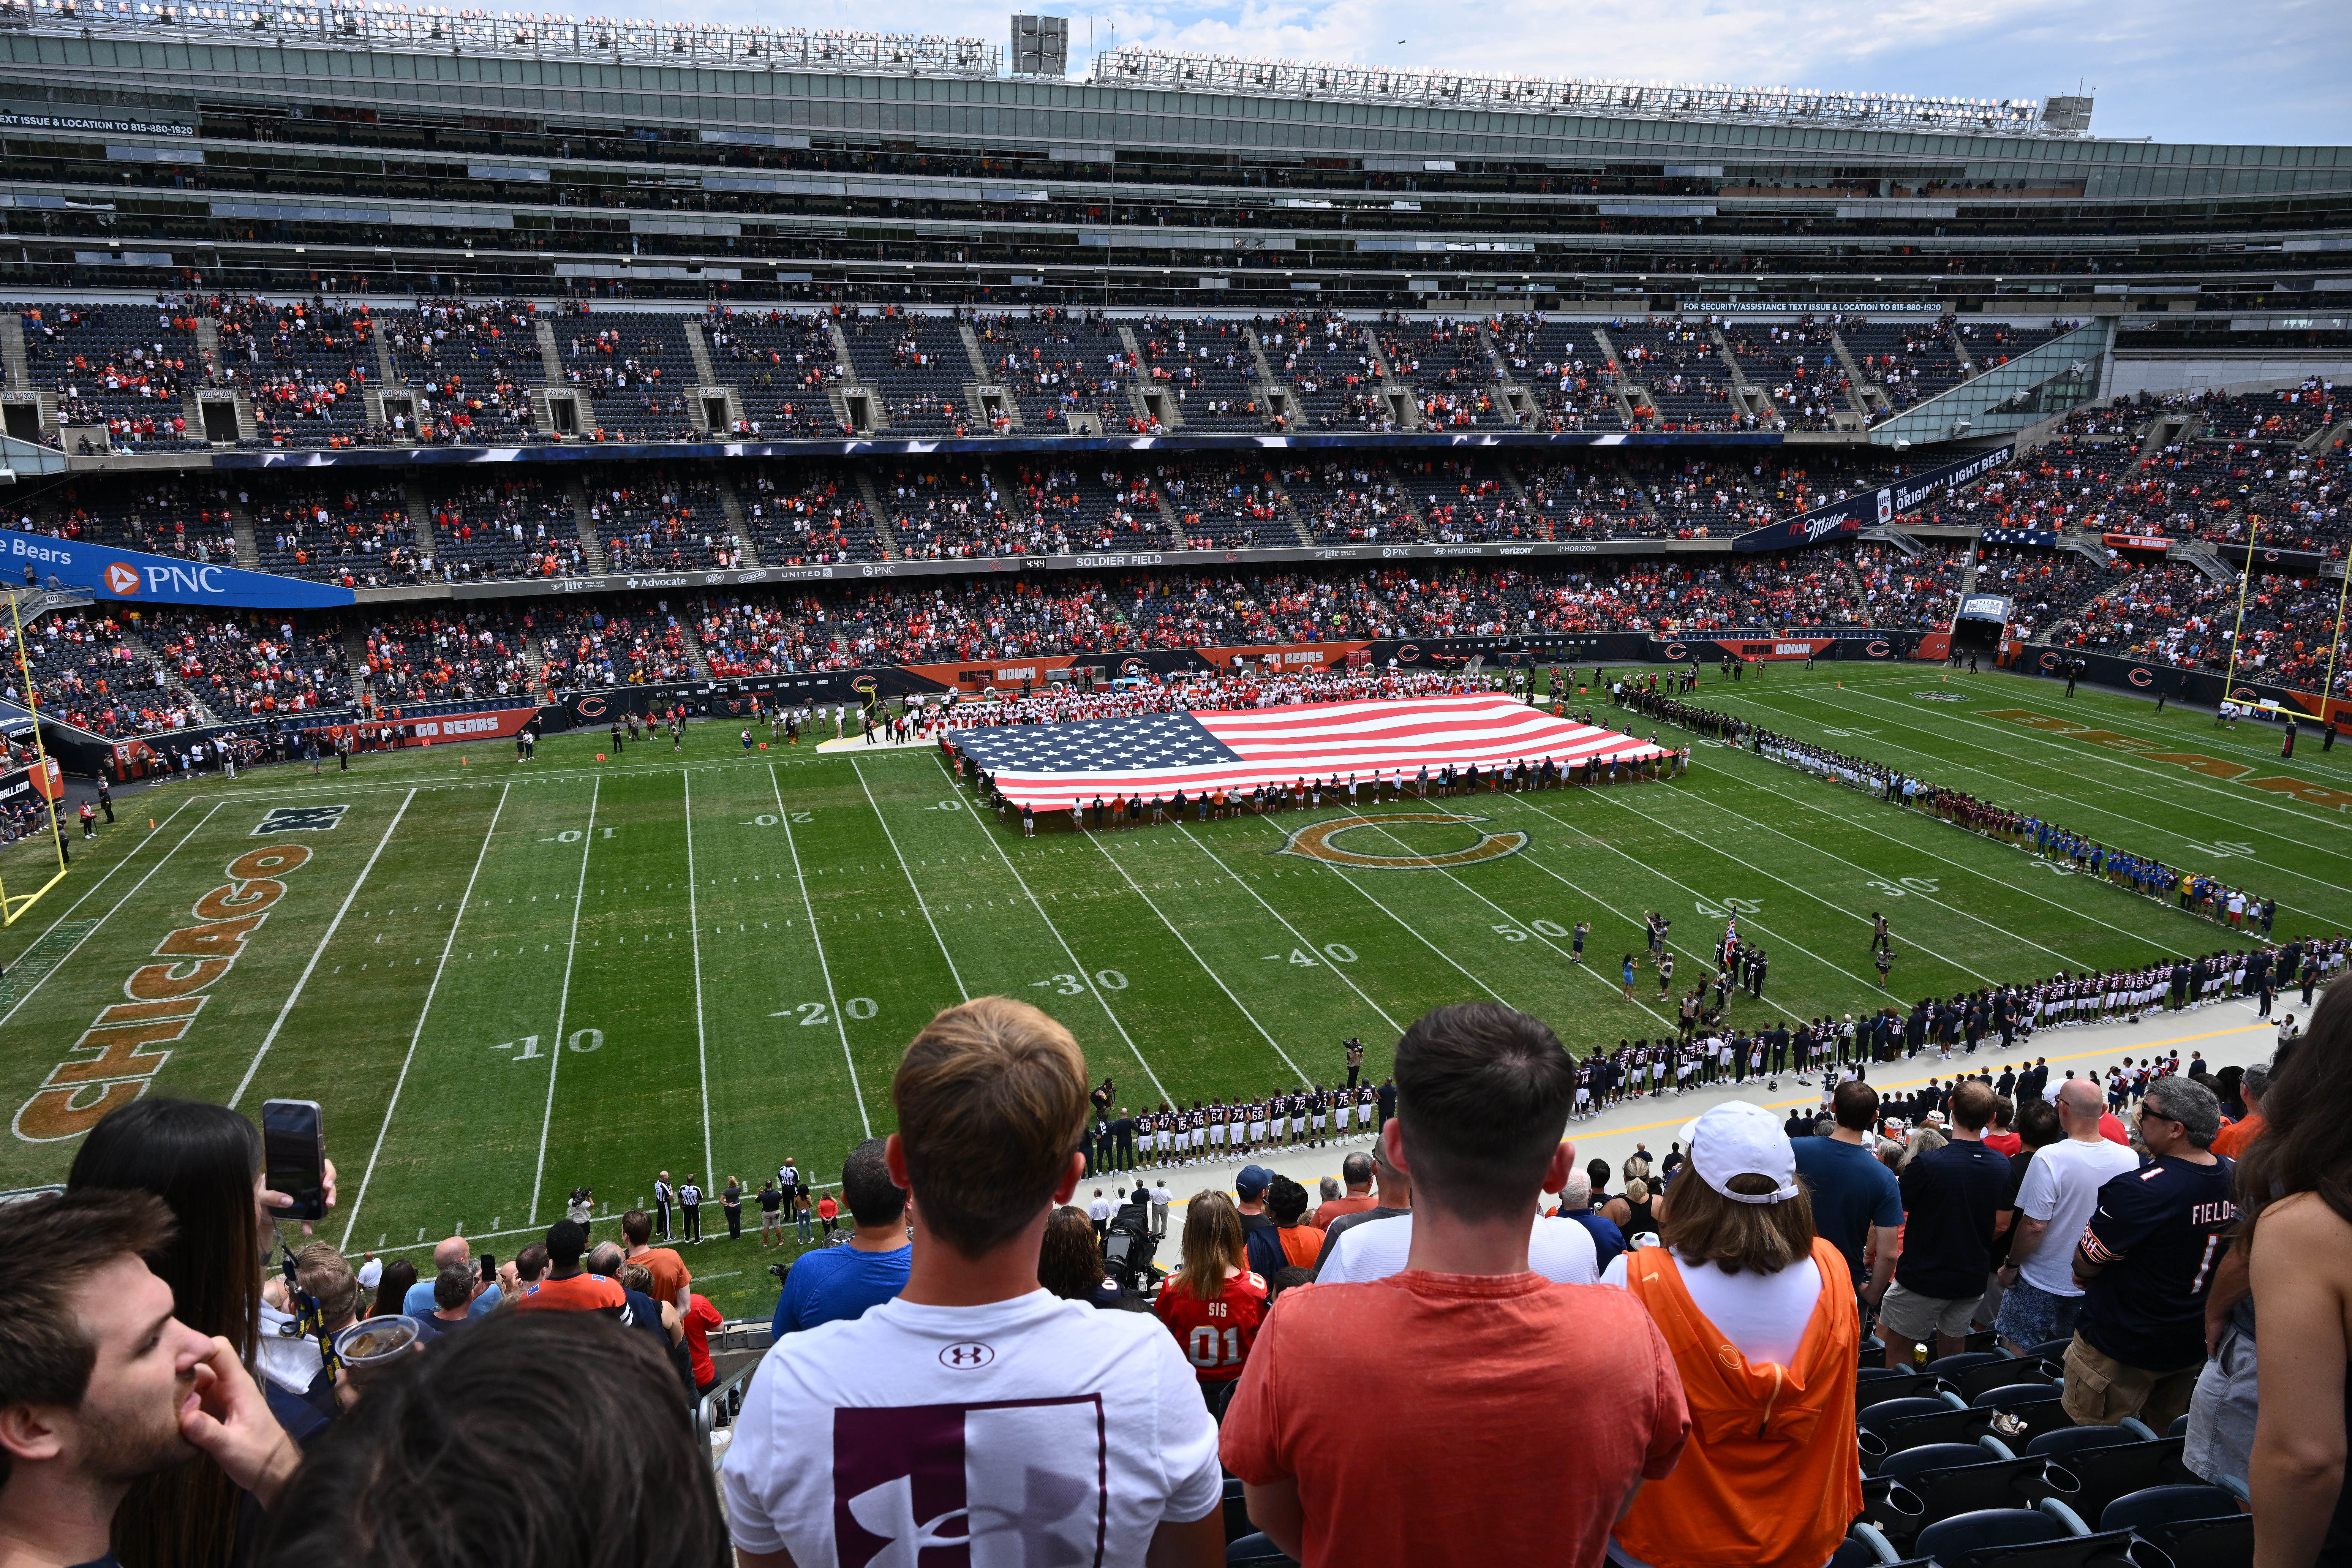 Ranking NFL stadiums from oldest to newest: Soldier Field, Lambeau Field to SoFi Stadium